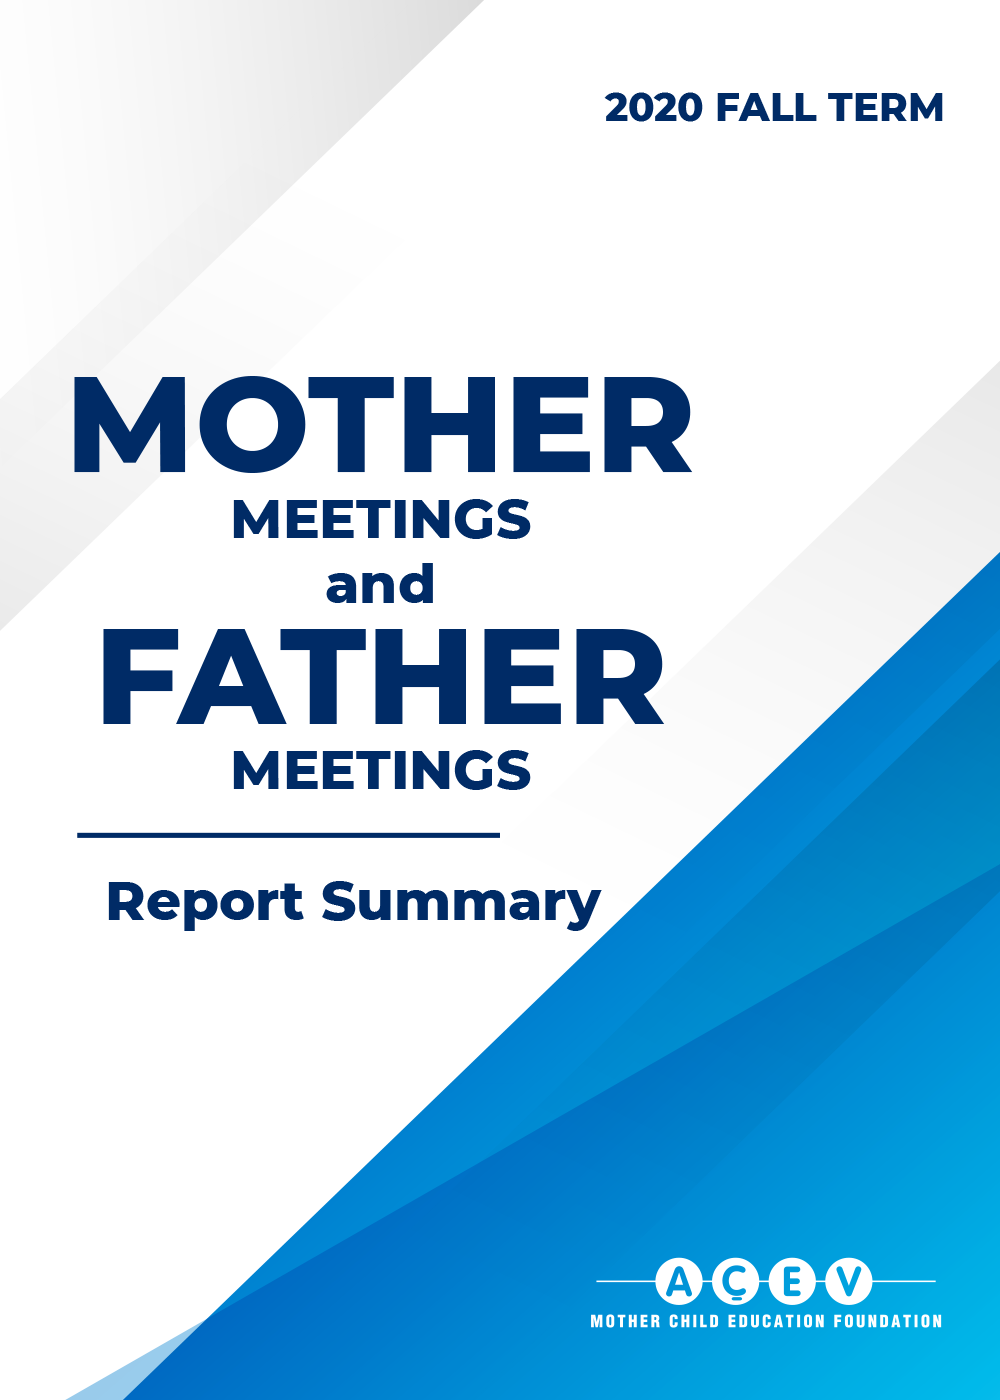 Mother Meetings and Father Meetings 2020 Fall Term Summary Report